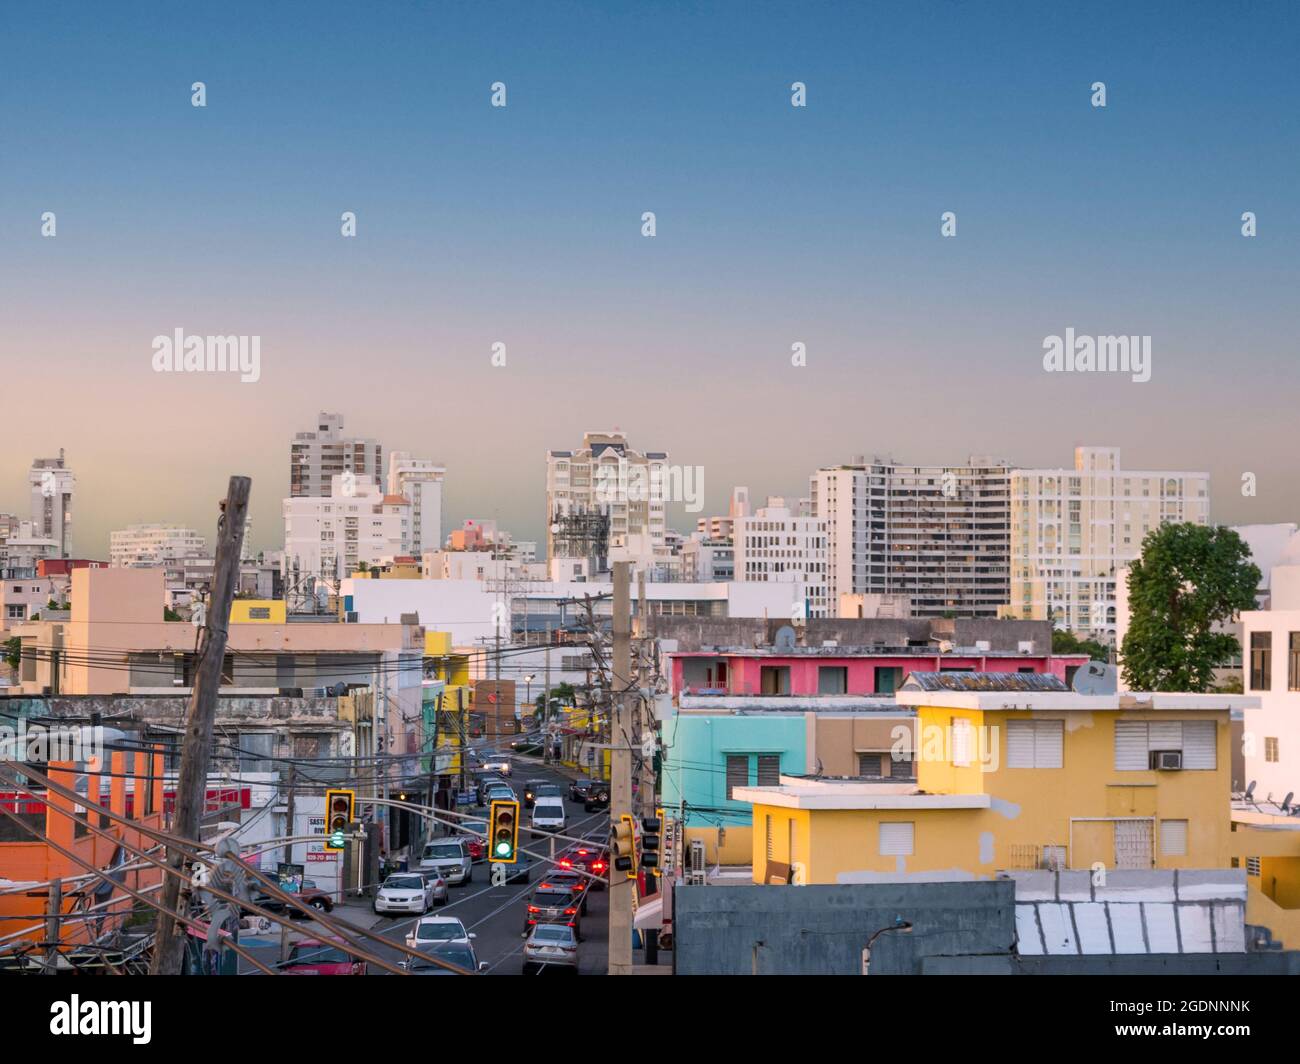 Santurce, San Juan, Puerto Rico. January 2021. Calle Loiza is the place where you feel at home in Santurce Puerto Rico. An authentic Puerto Rican comm Stock Photo